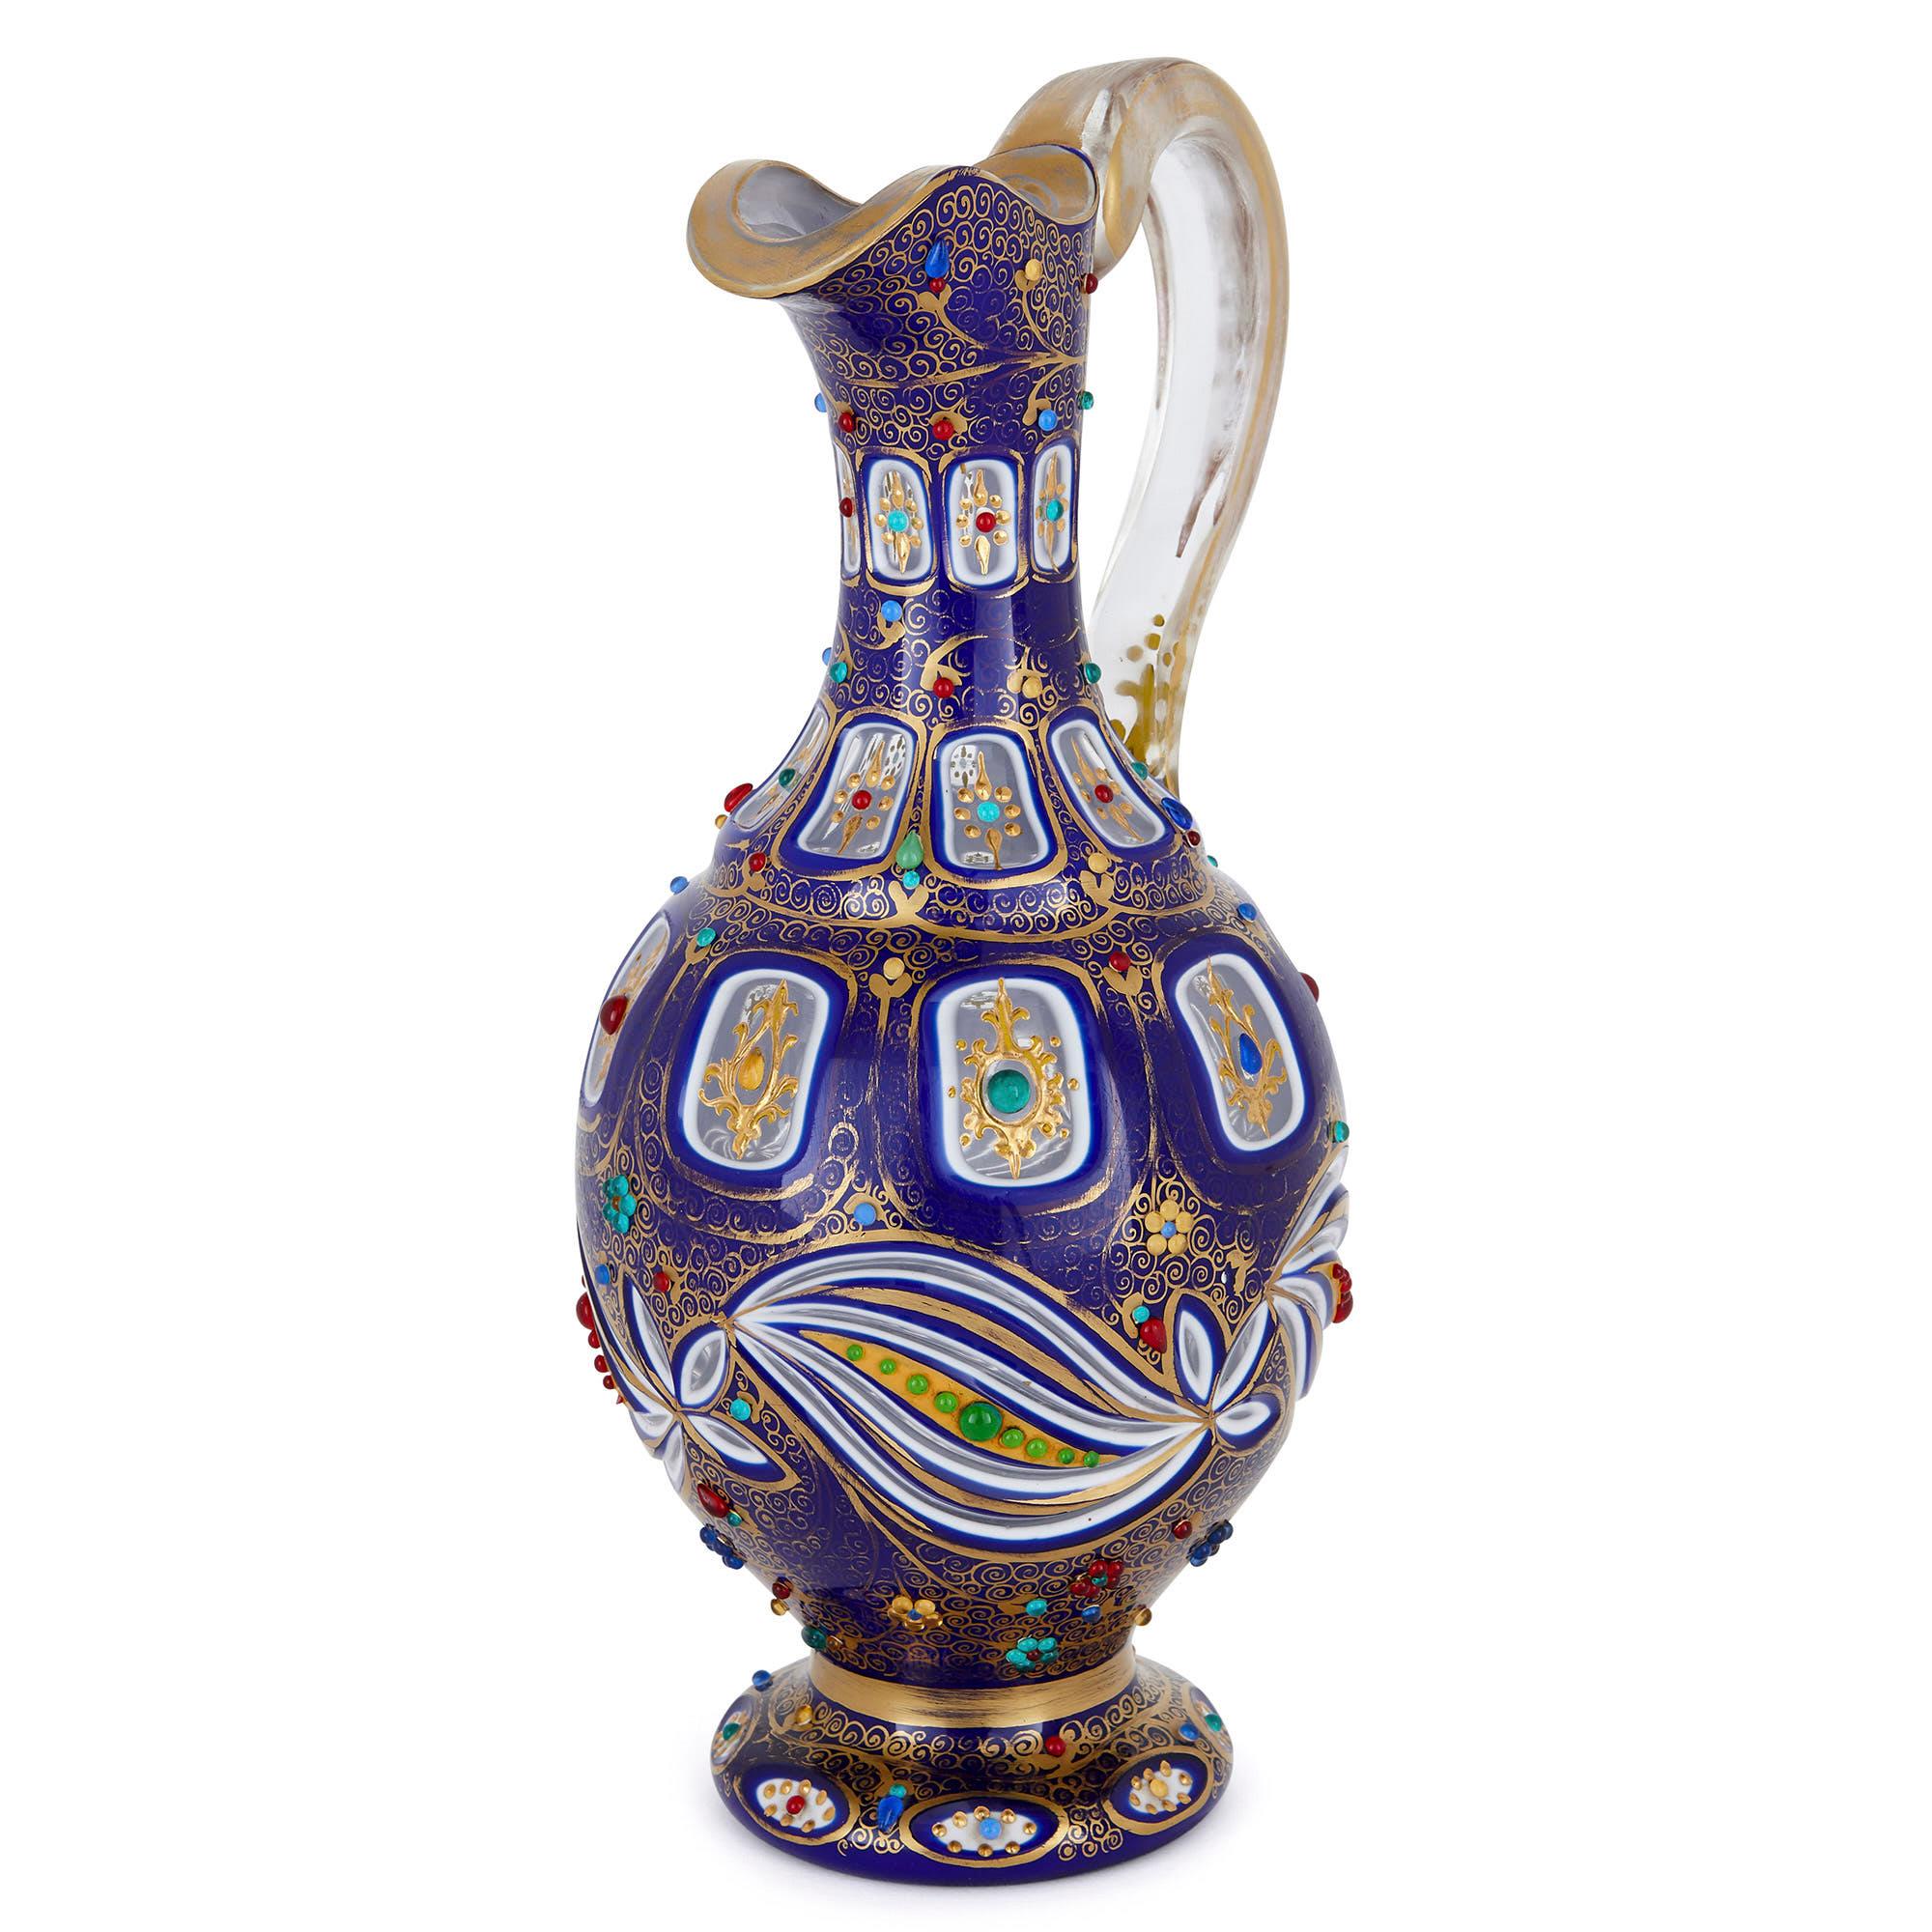 This beautiful glass jug (or ewer) was created in the late 19th century in Bohemia (modern-day Czech Republic). Antique Bohemian glass is prized for the exceptional quality of its craftsmanship and ornamentation. This jug will make a wonderful